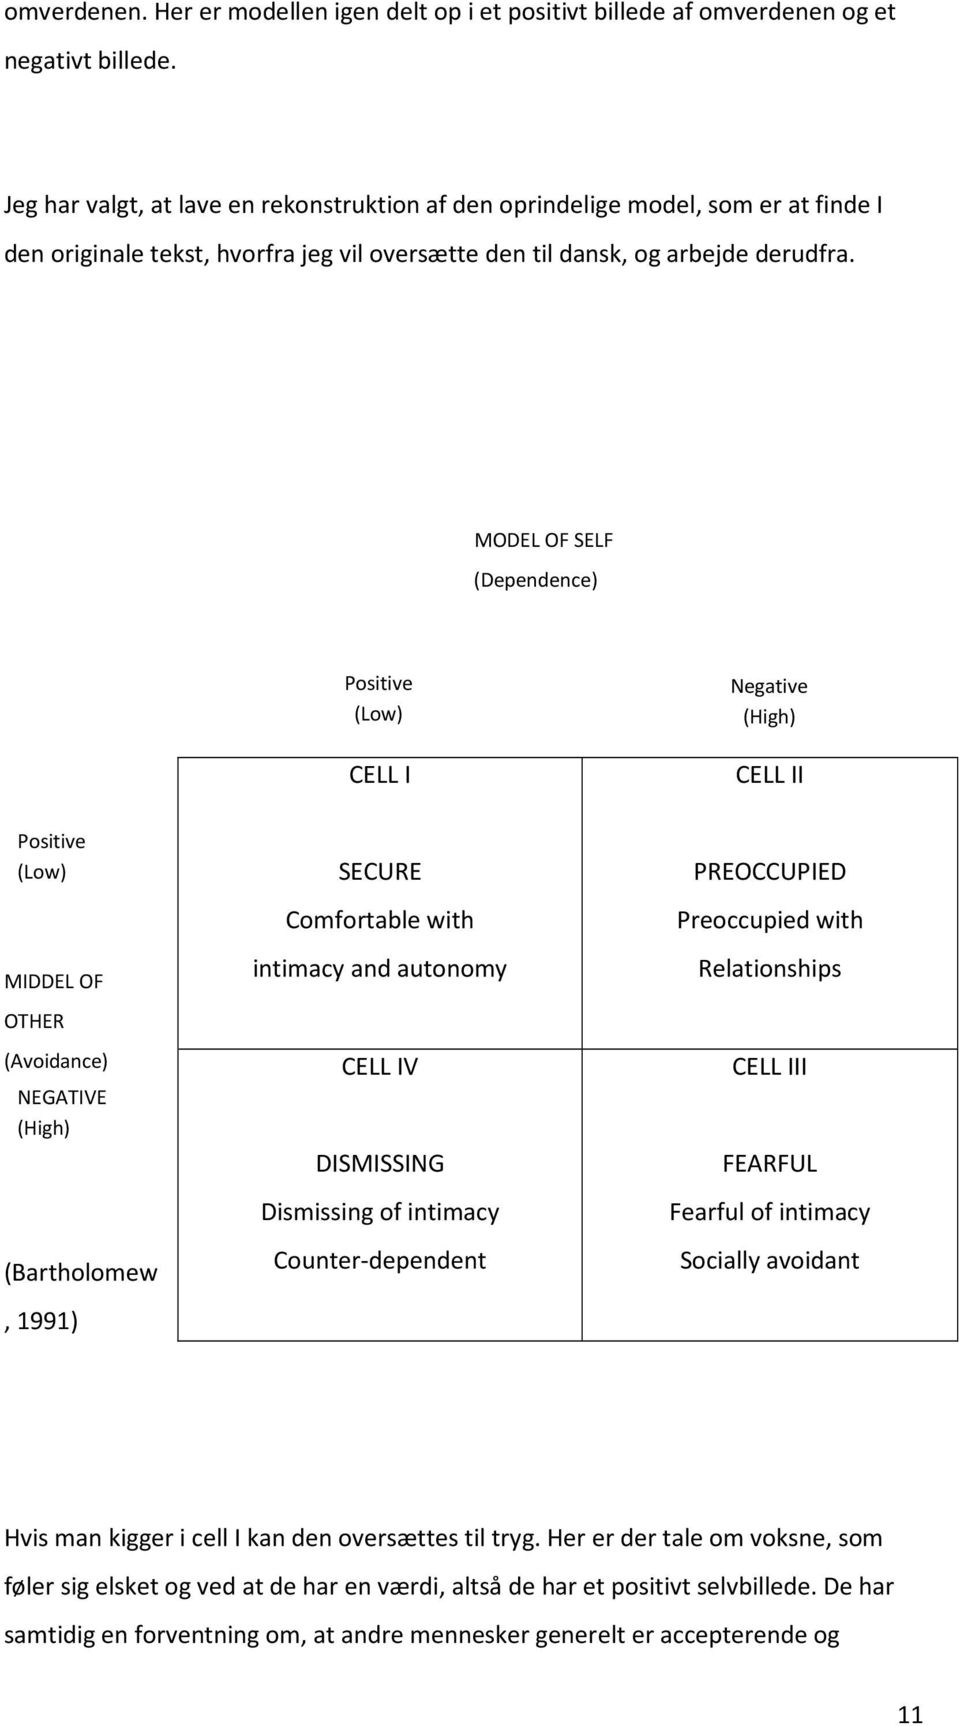 MODEL OF SELF (Dependence) Positive (Low) CELL I Negative (High) CELL II Positive (Low) MIDDEL OF OTHER (Avoidance) NEGATIVE (High) (Bartholomew, 1991) SECURE Comfortable with intimacy and autonomy